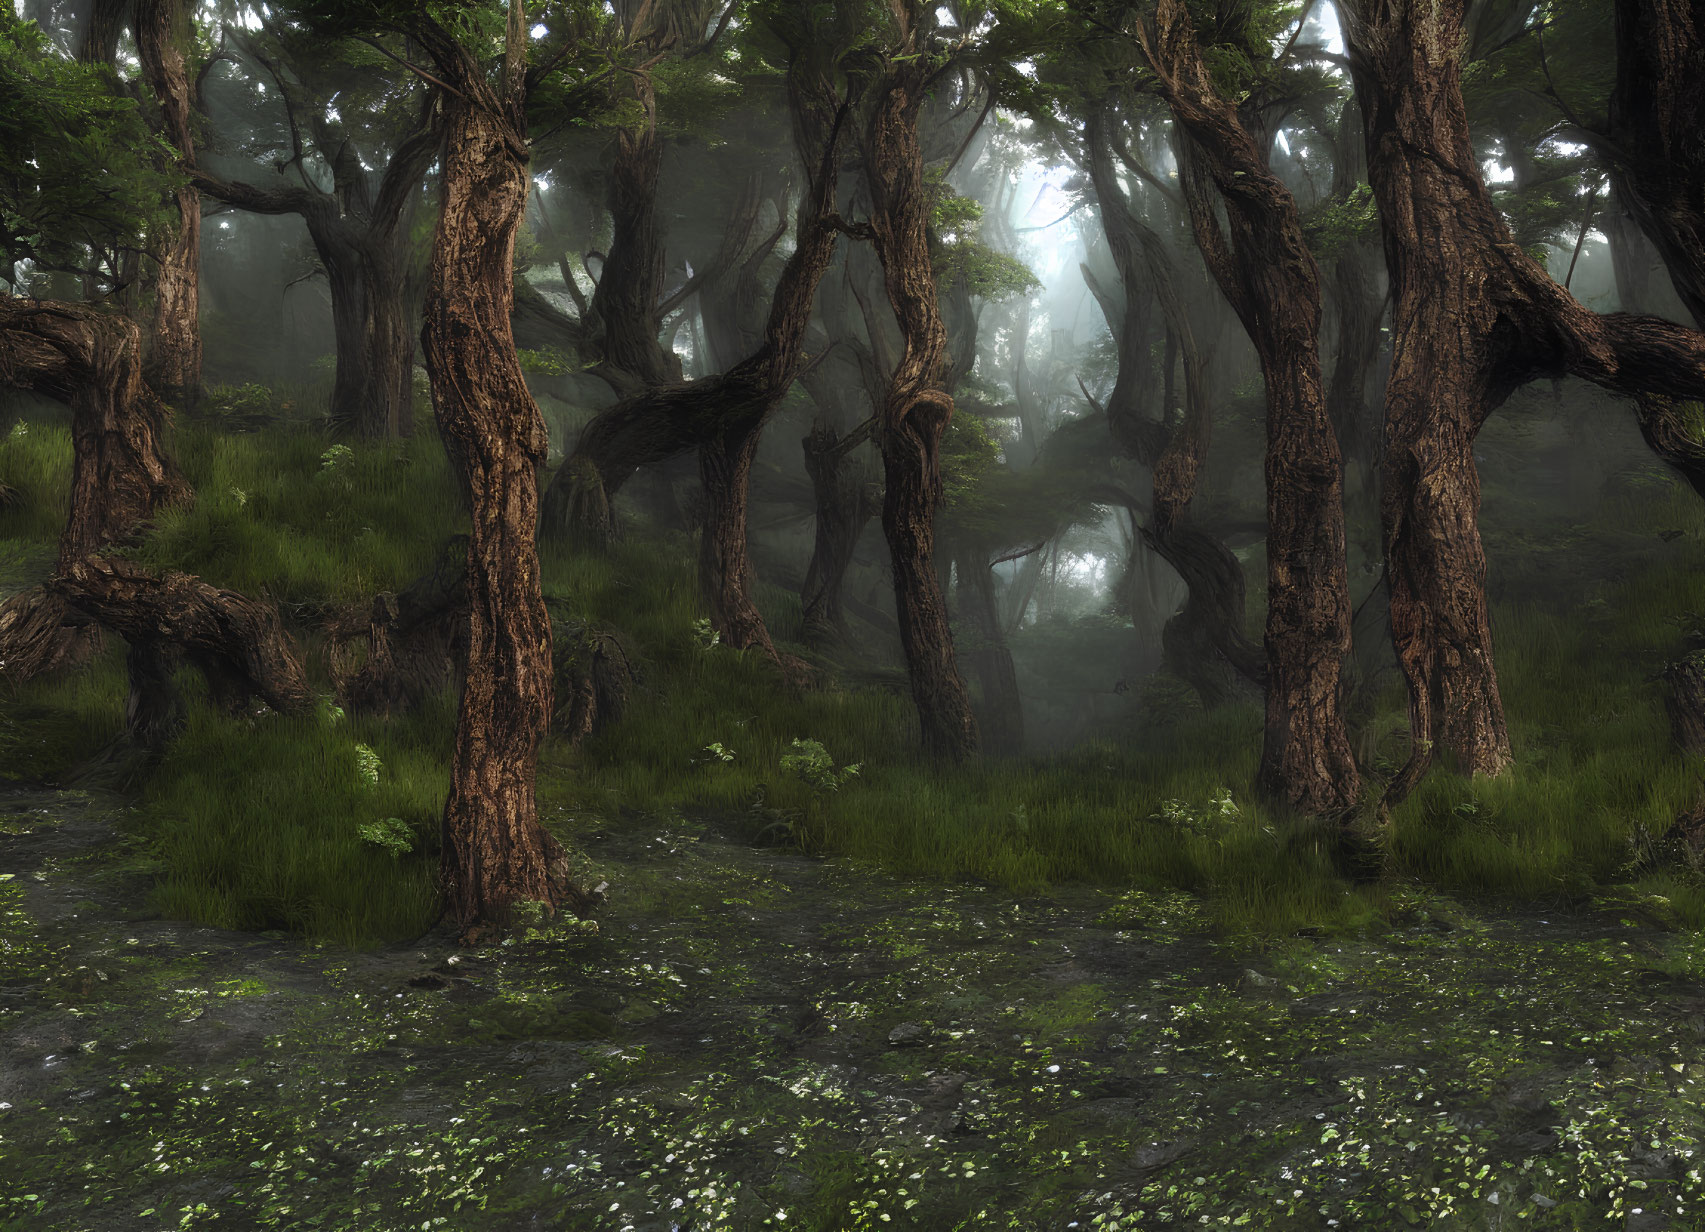 Misty forest with gnarled trees and green moss carpet